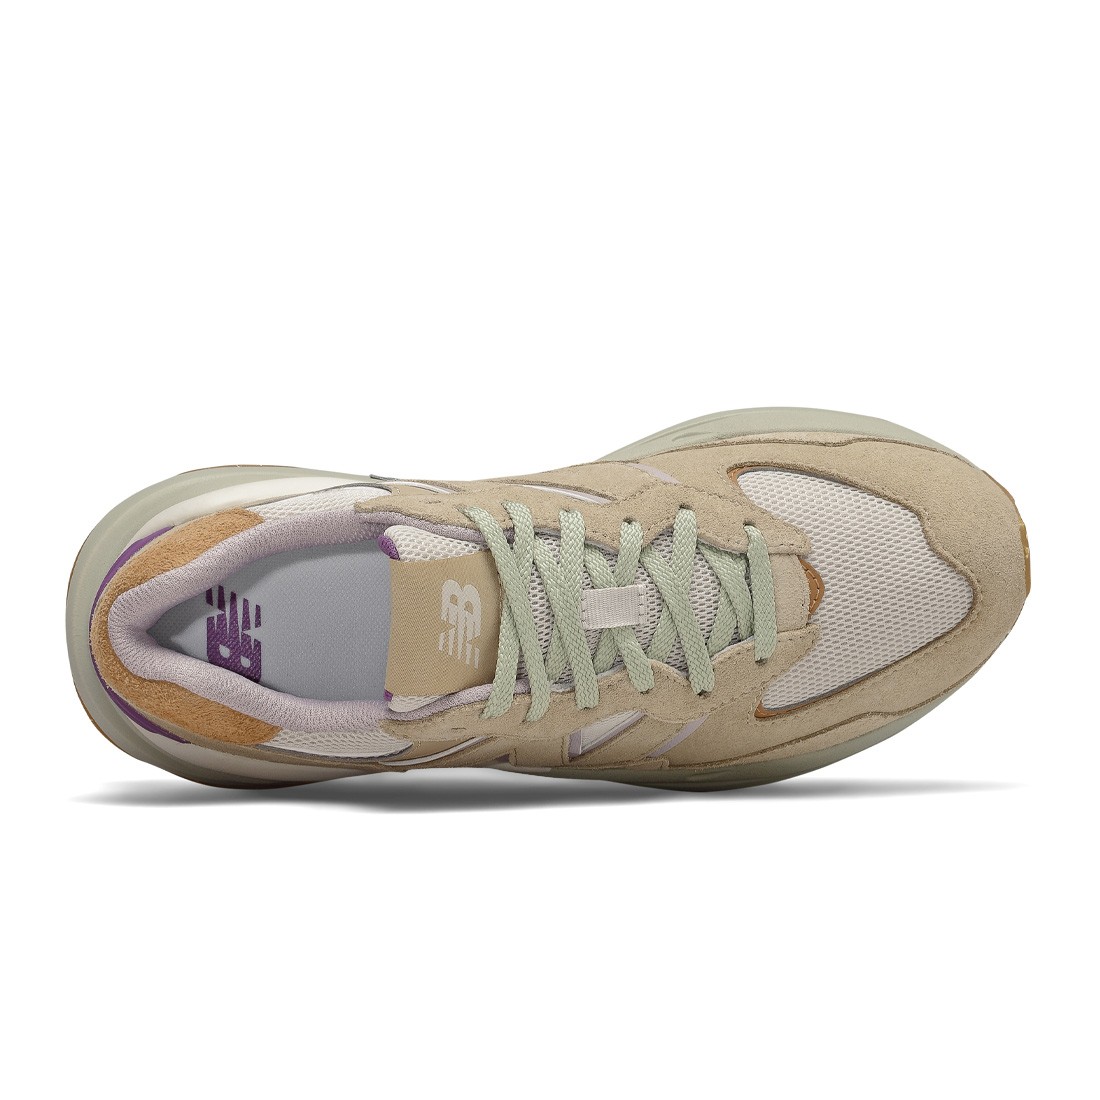 New Balance Women's 997H in Beige White Synthetic